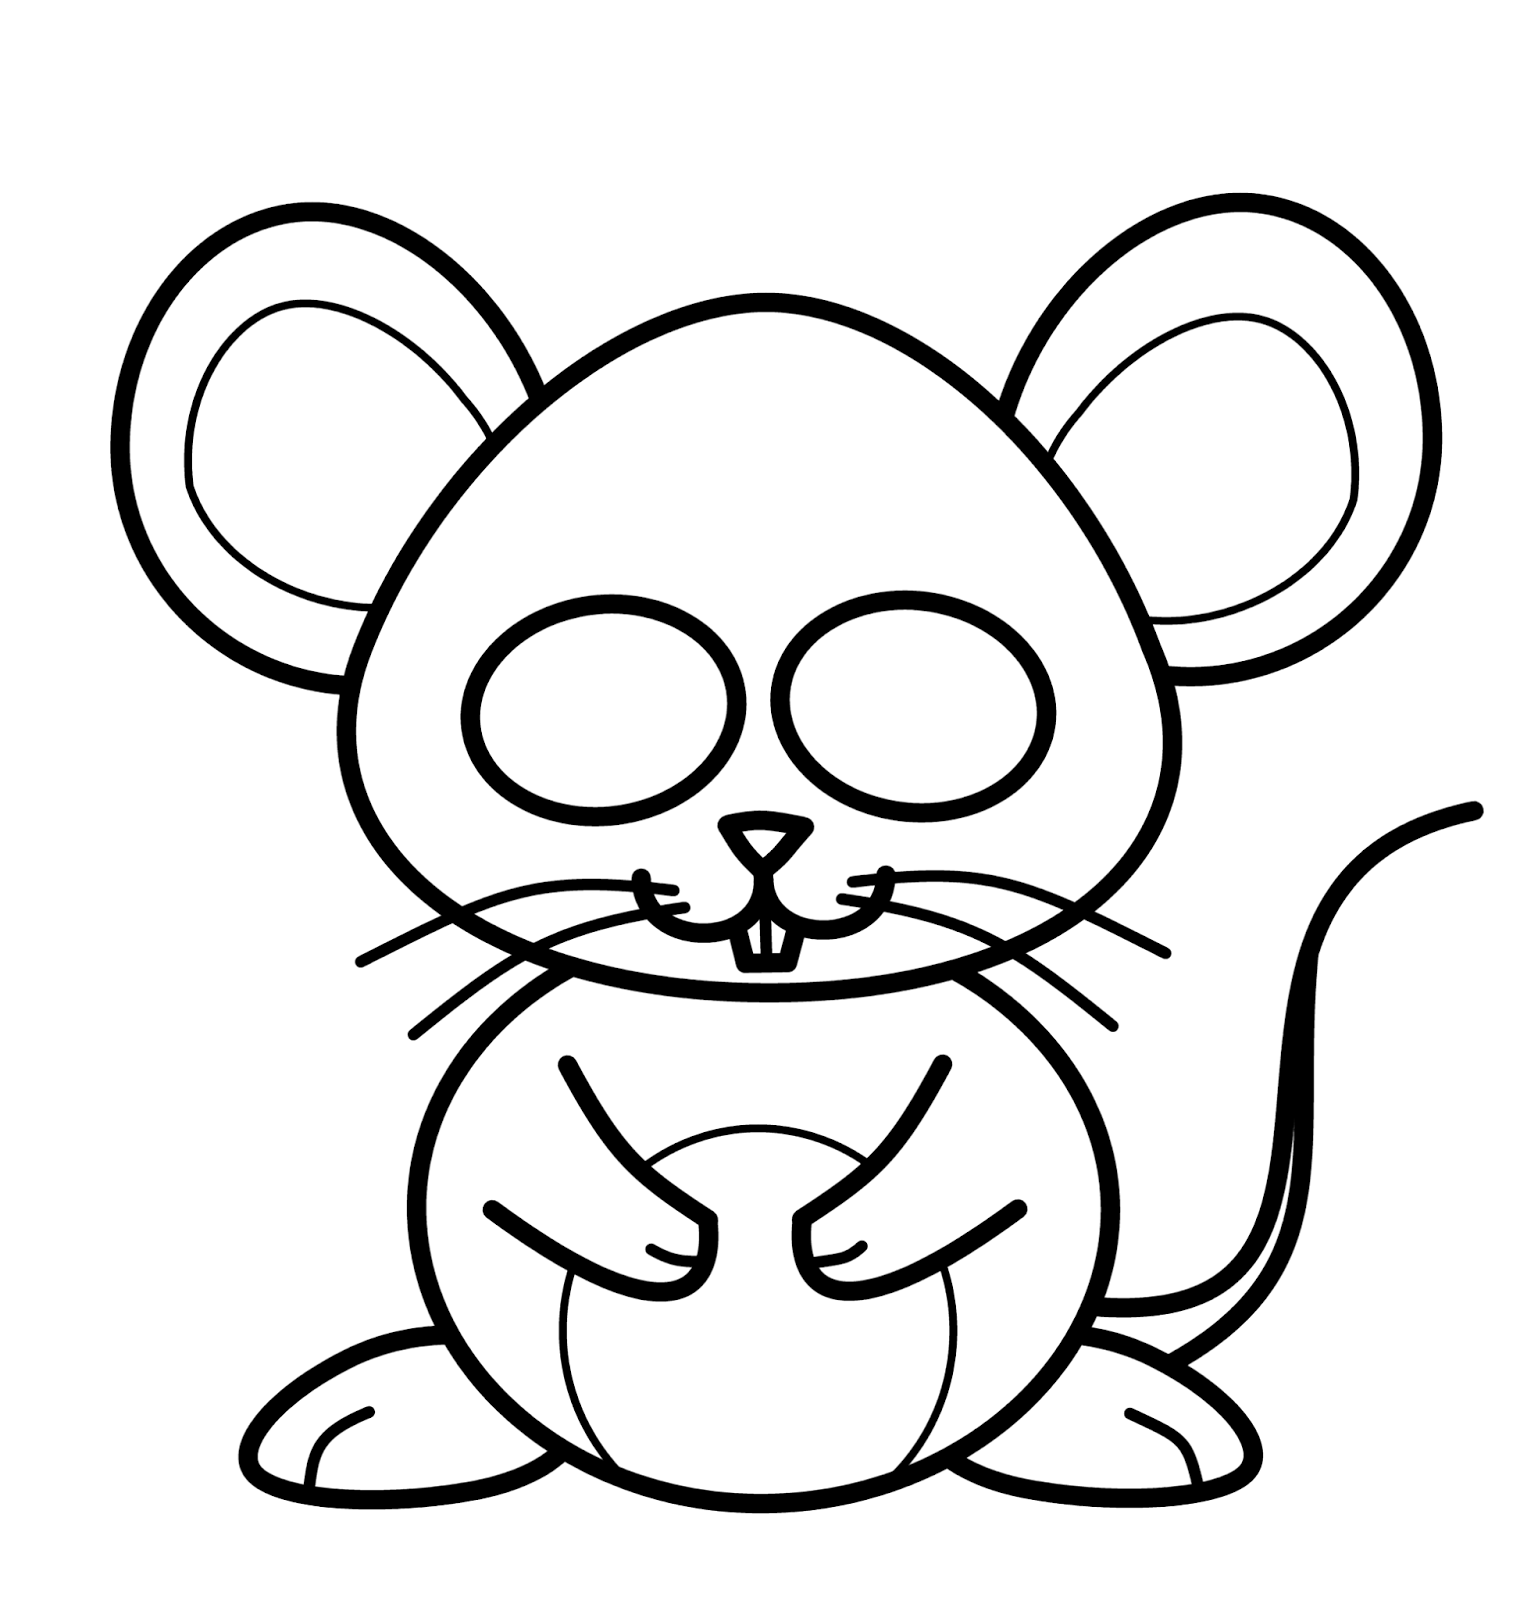 How To Draw Cartoons: Mouse